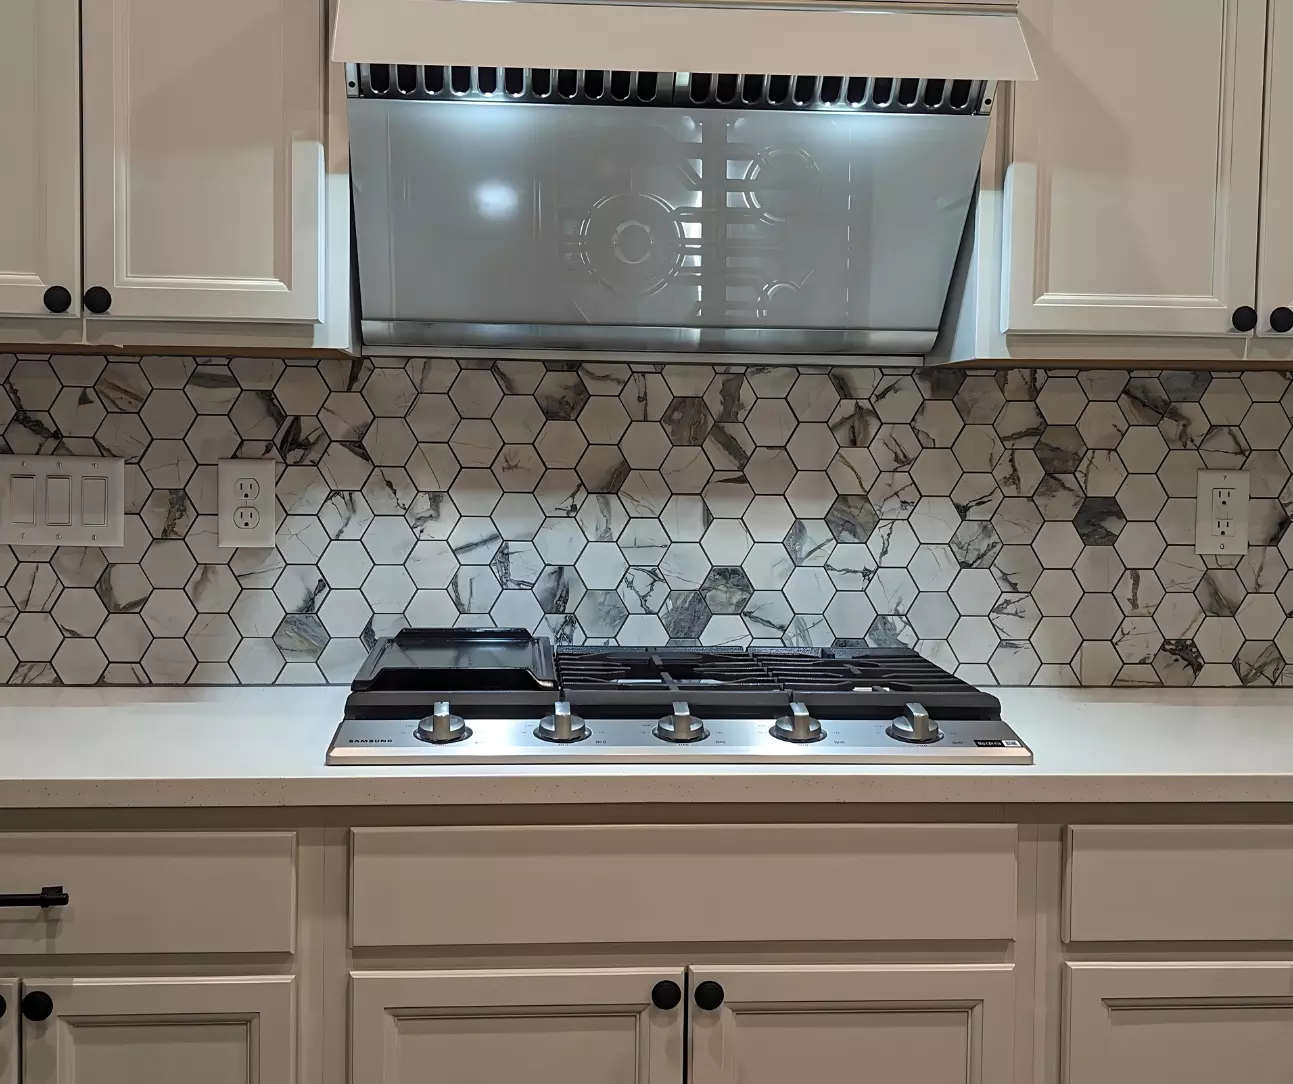 Make Every Meal Special in Your Newly Remodeled Kitchen